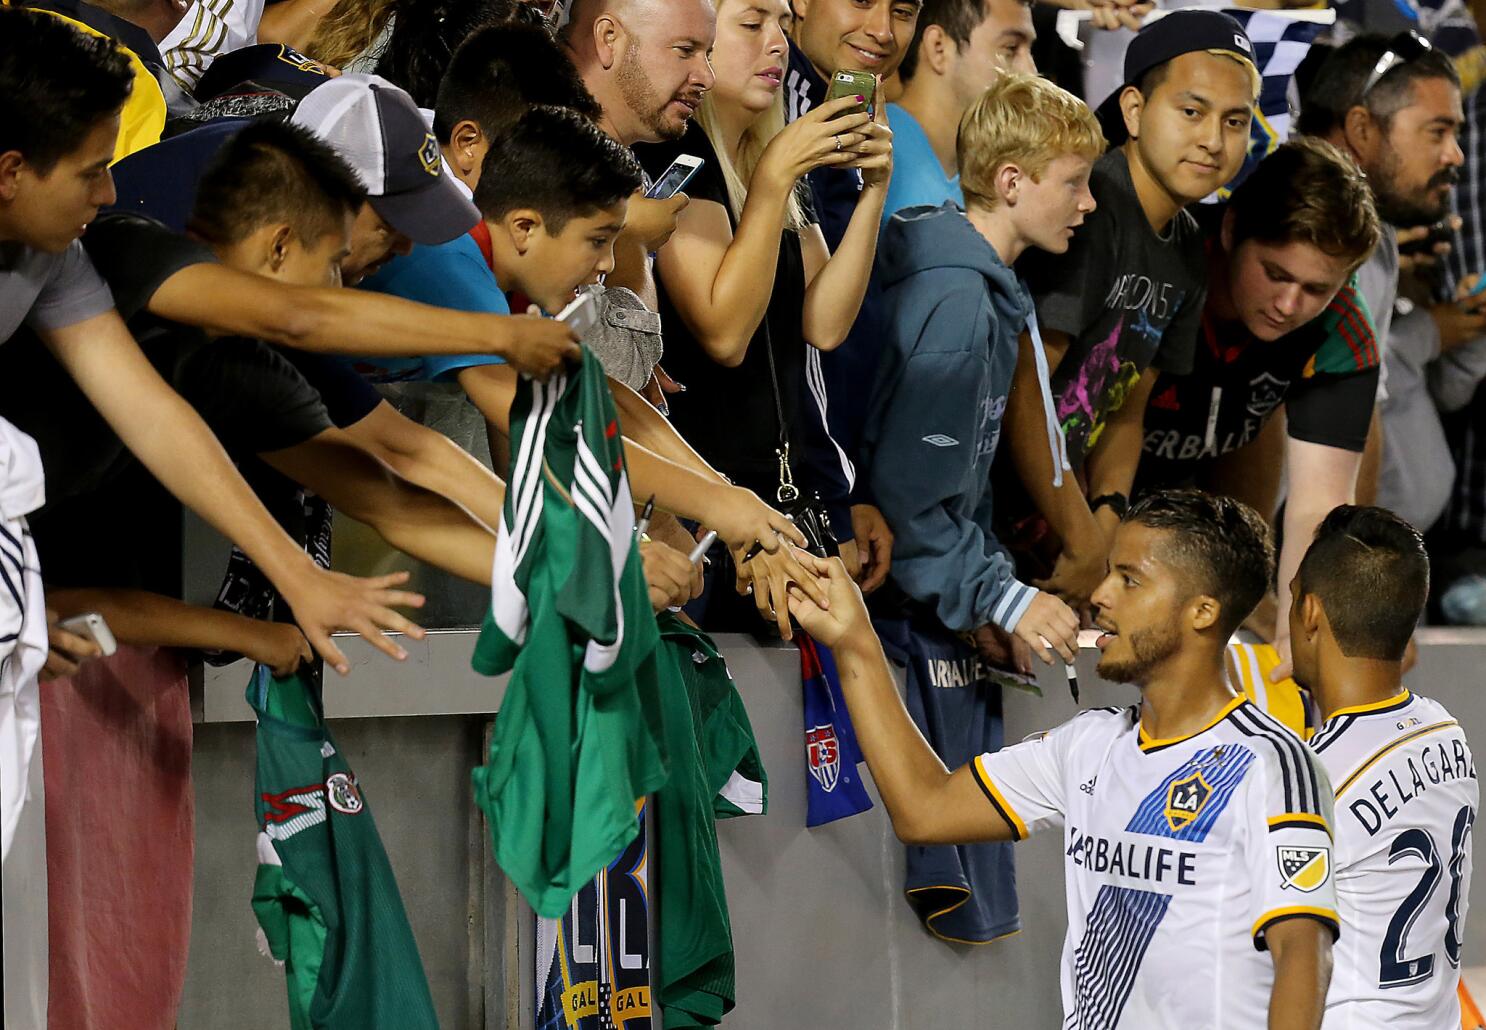 LAFC's well-traveled fan base remains a dedicated force home and